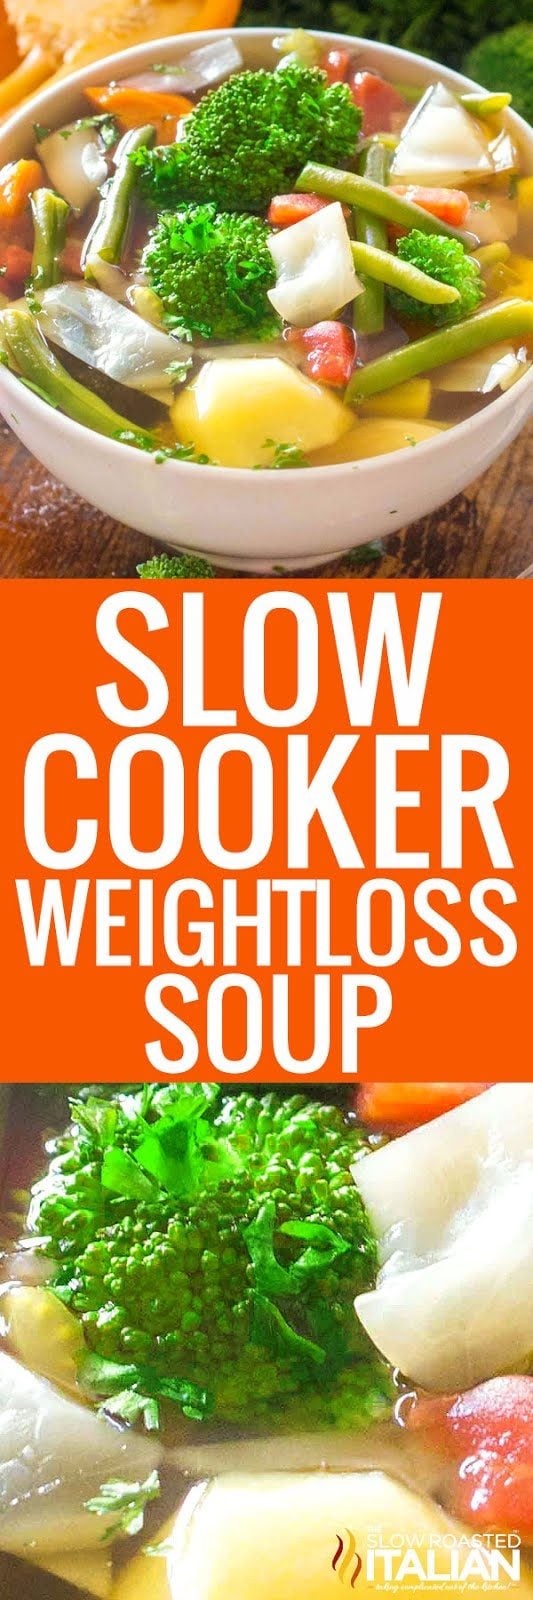 slow cooker weight loss soup -pin